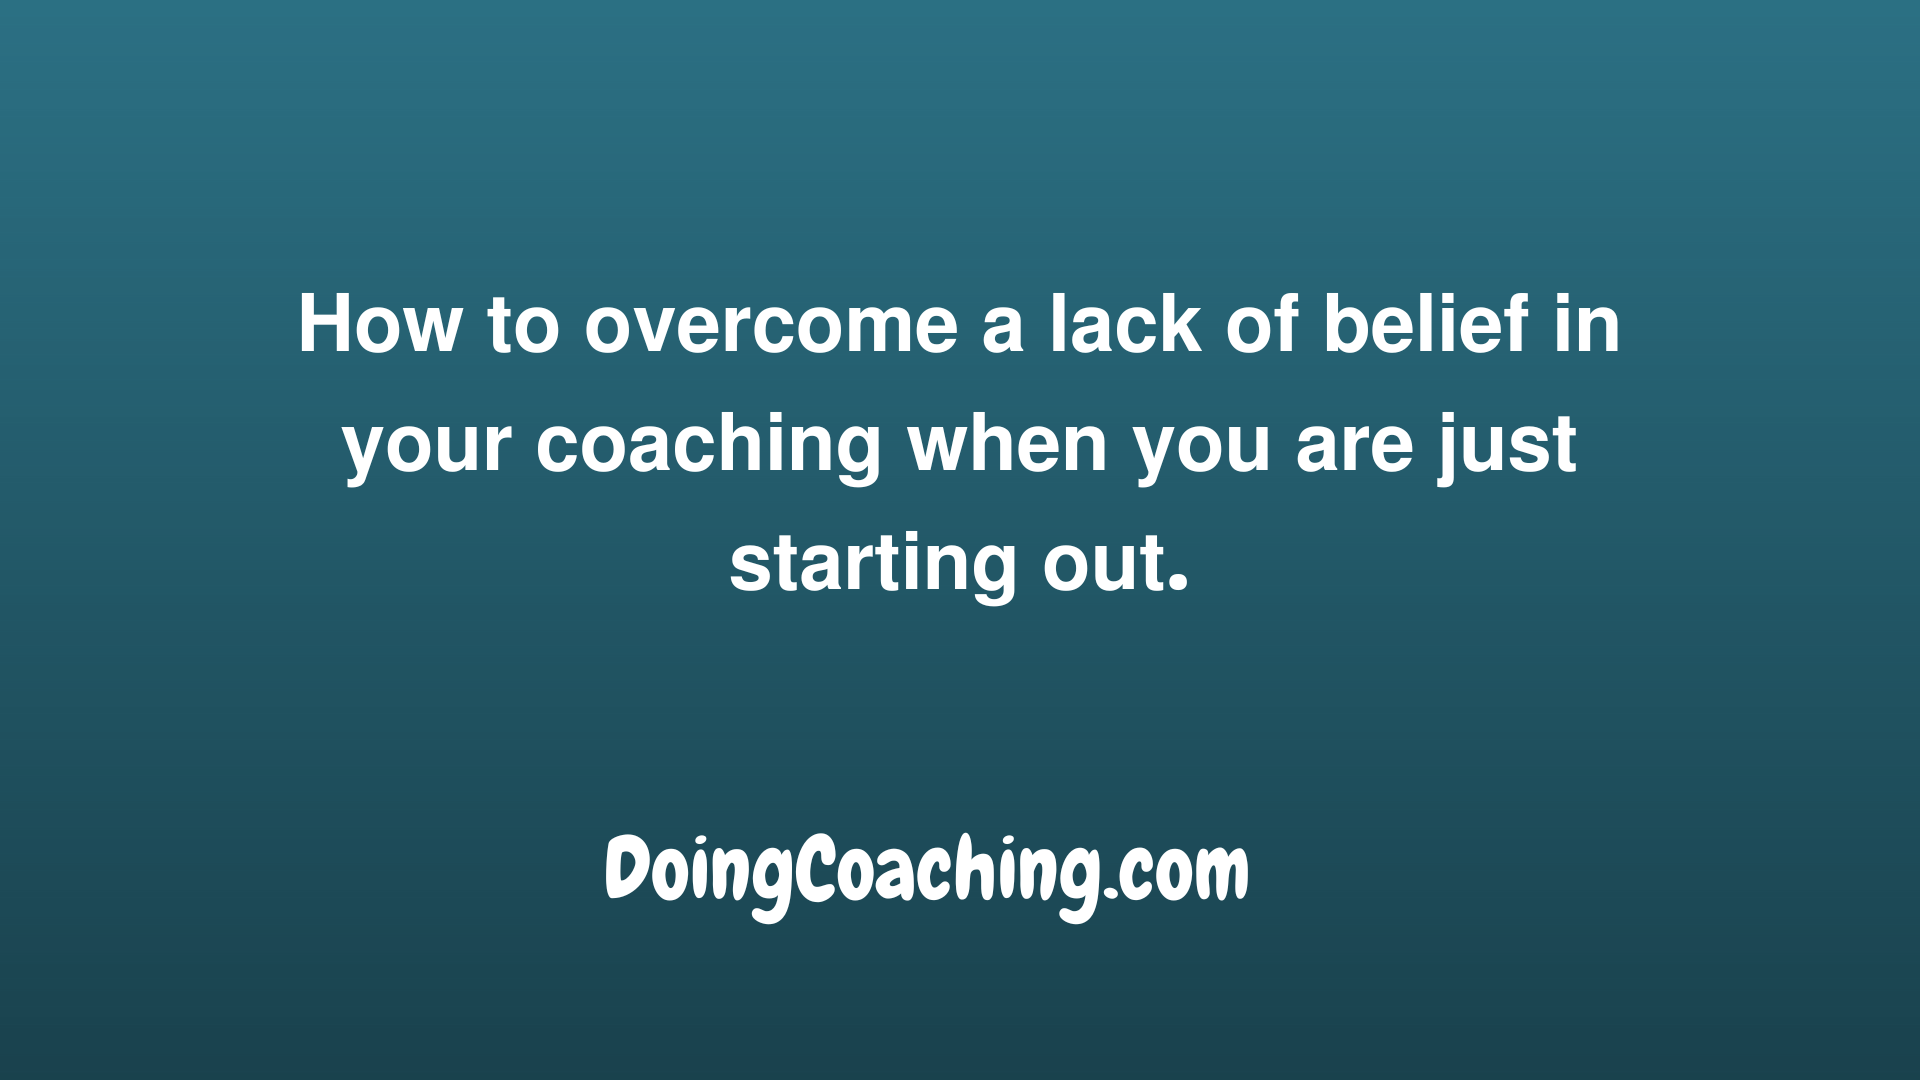 How to overcome a lack of belief in your coaching when you are just starting out pic